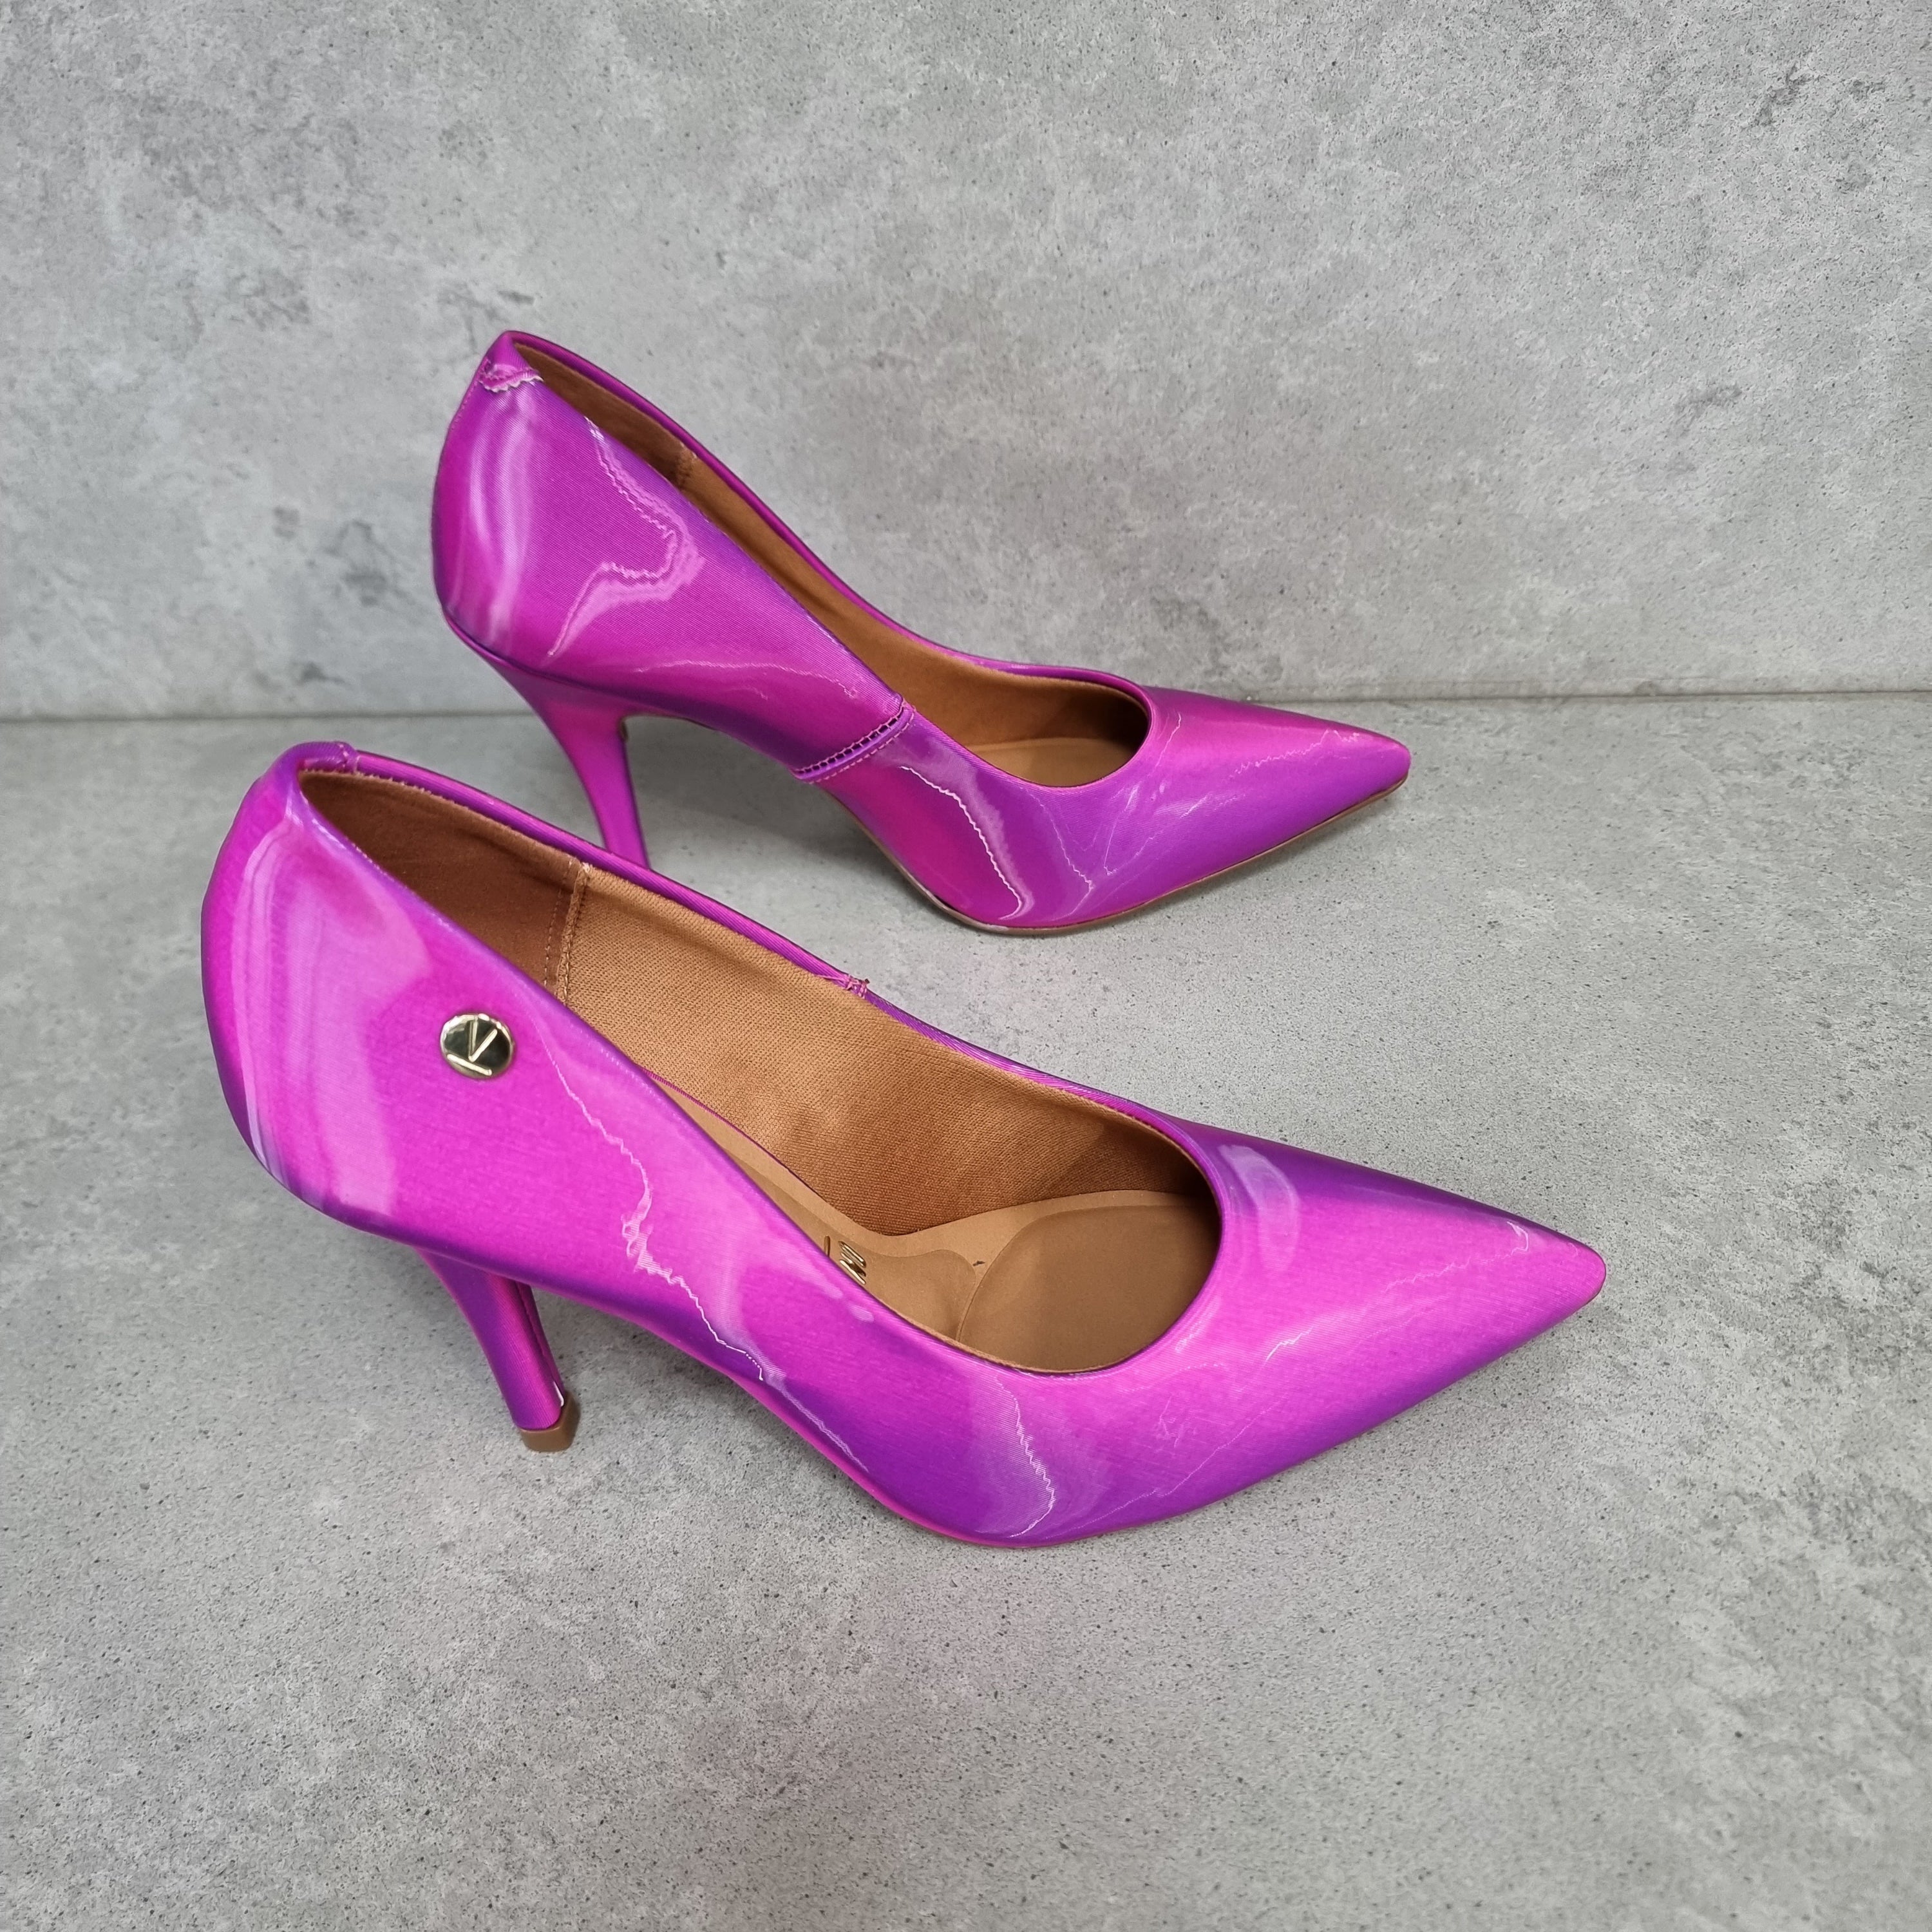 Vizzano 1184-1101 Pointy Toe Pump in Pearlescent Pink